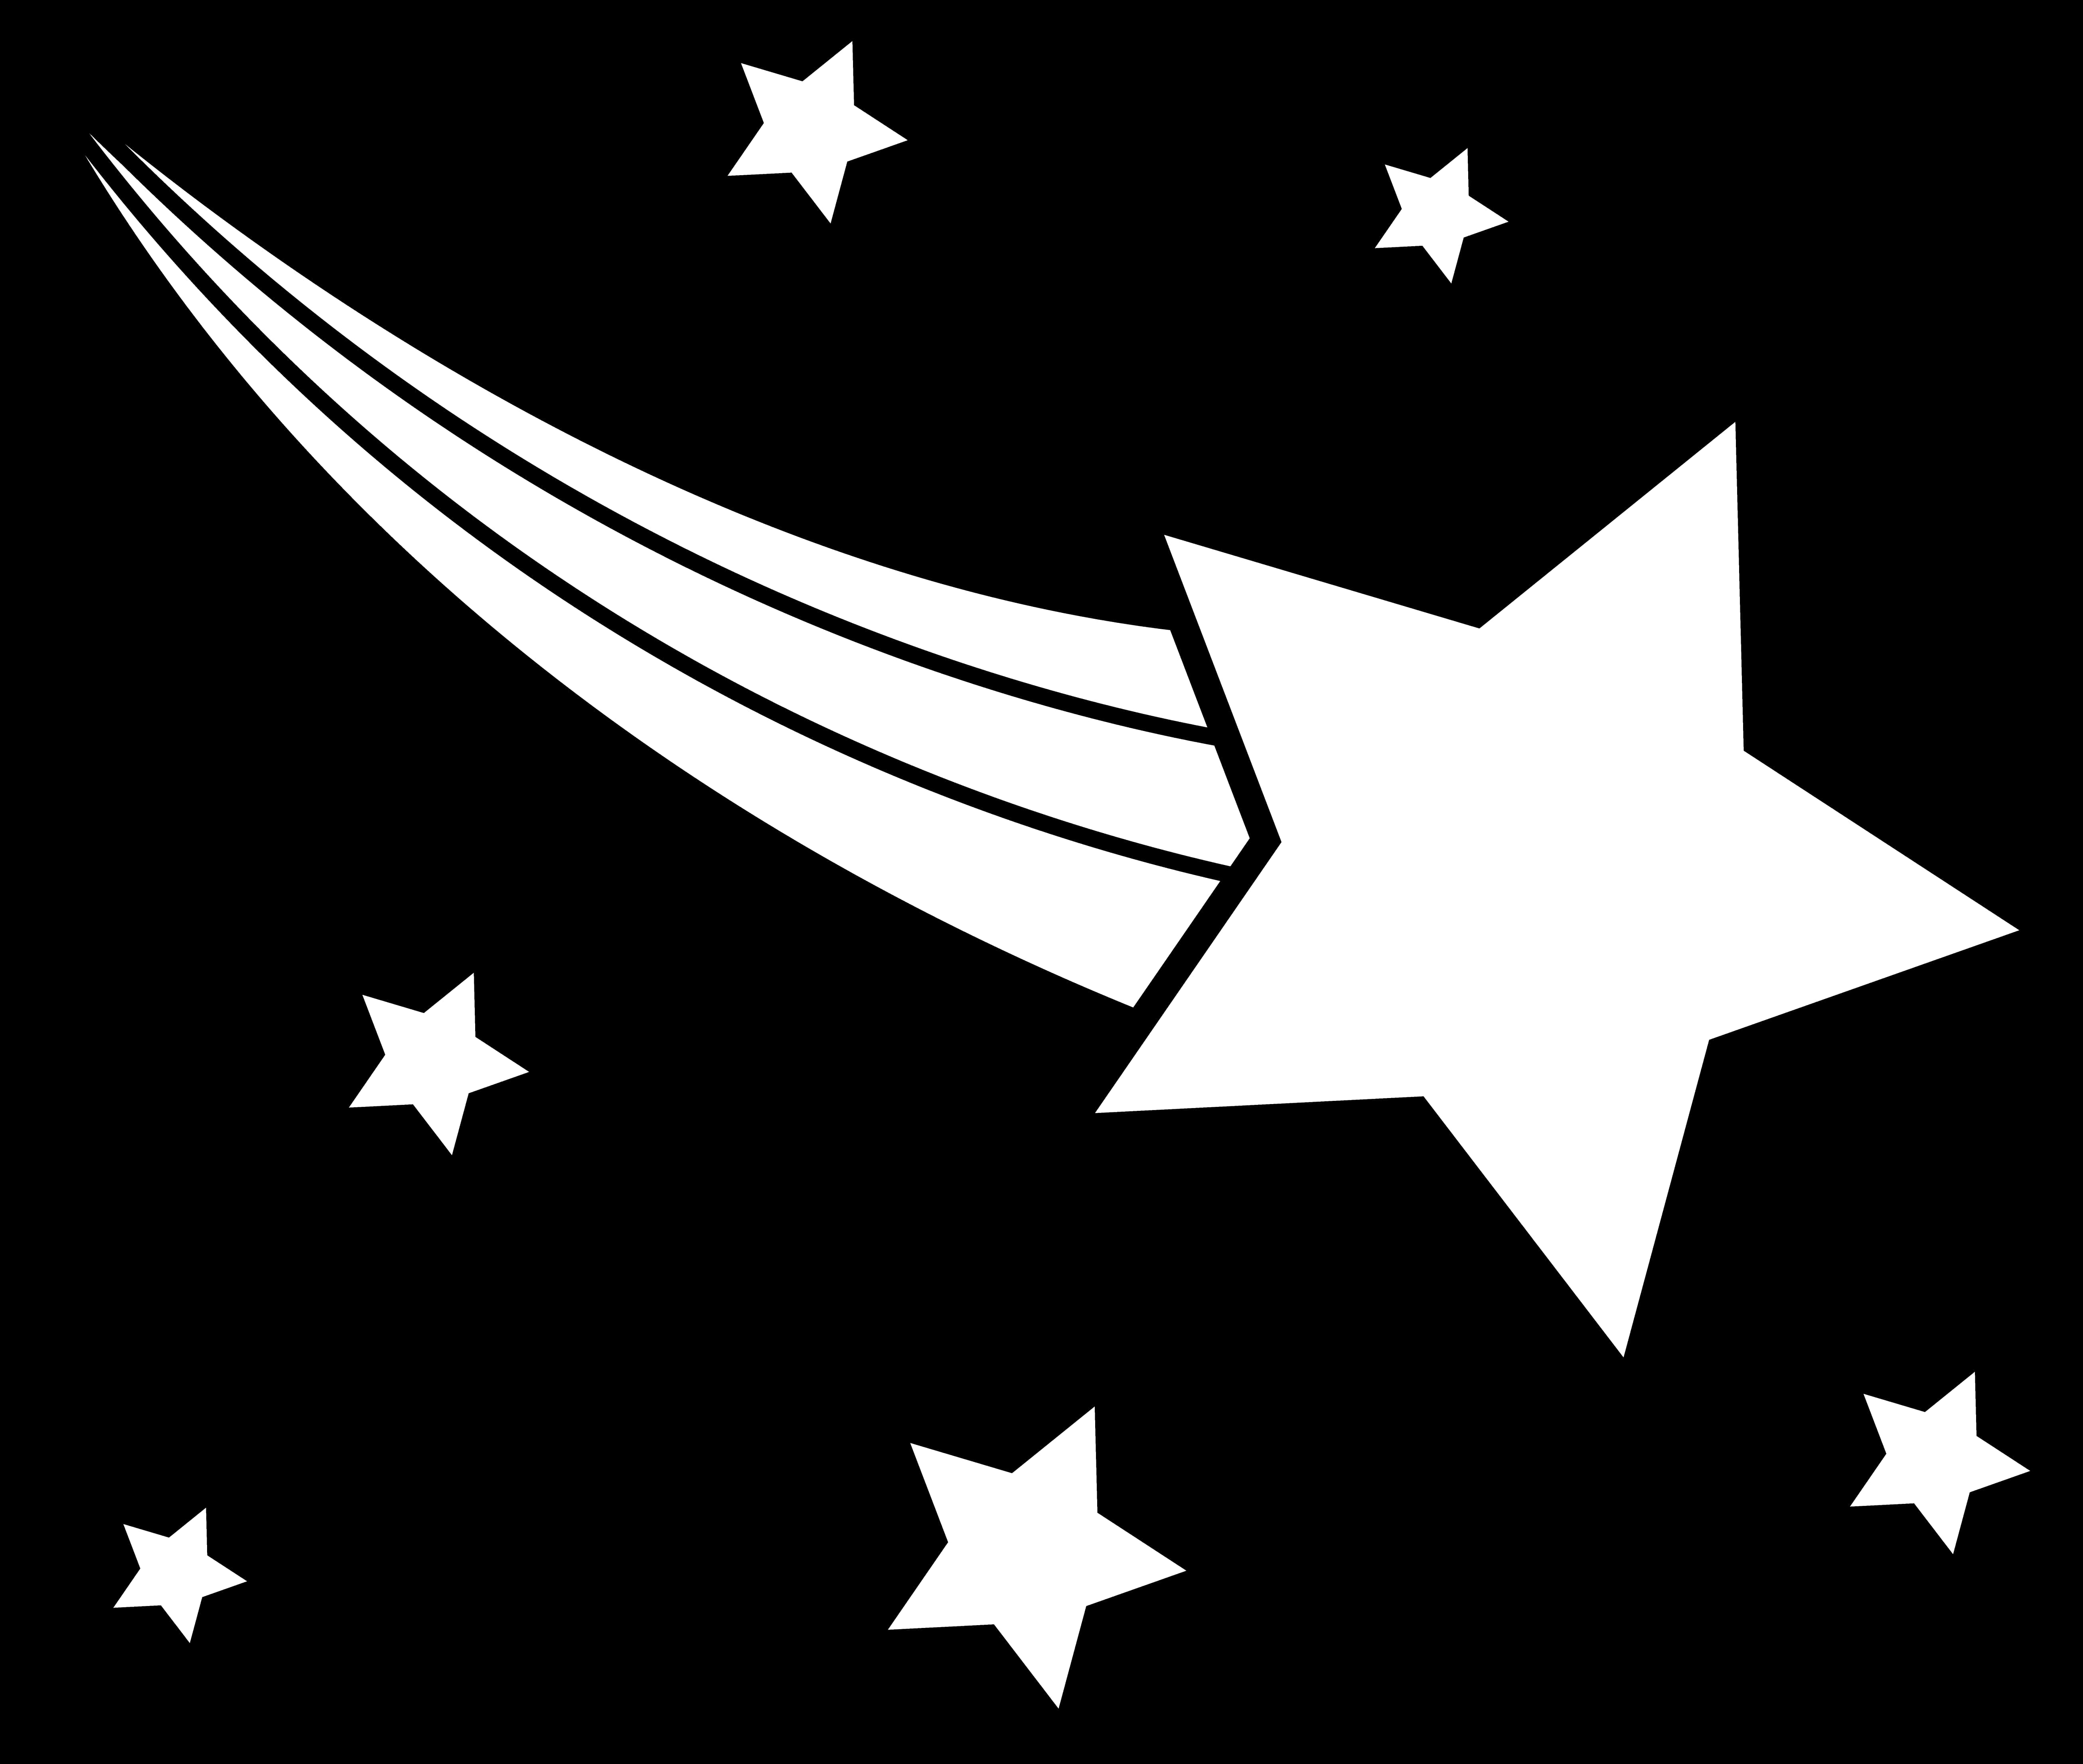 Stylized Shooting Star Graphic